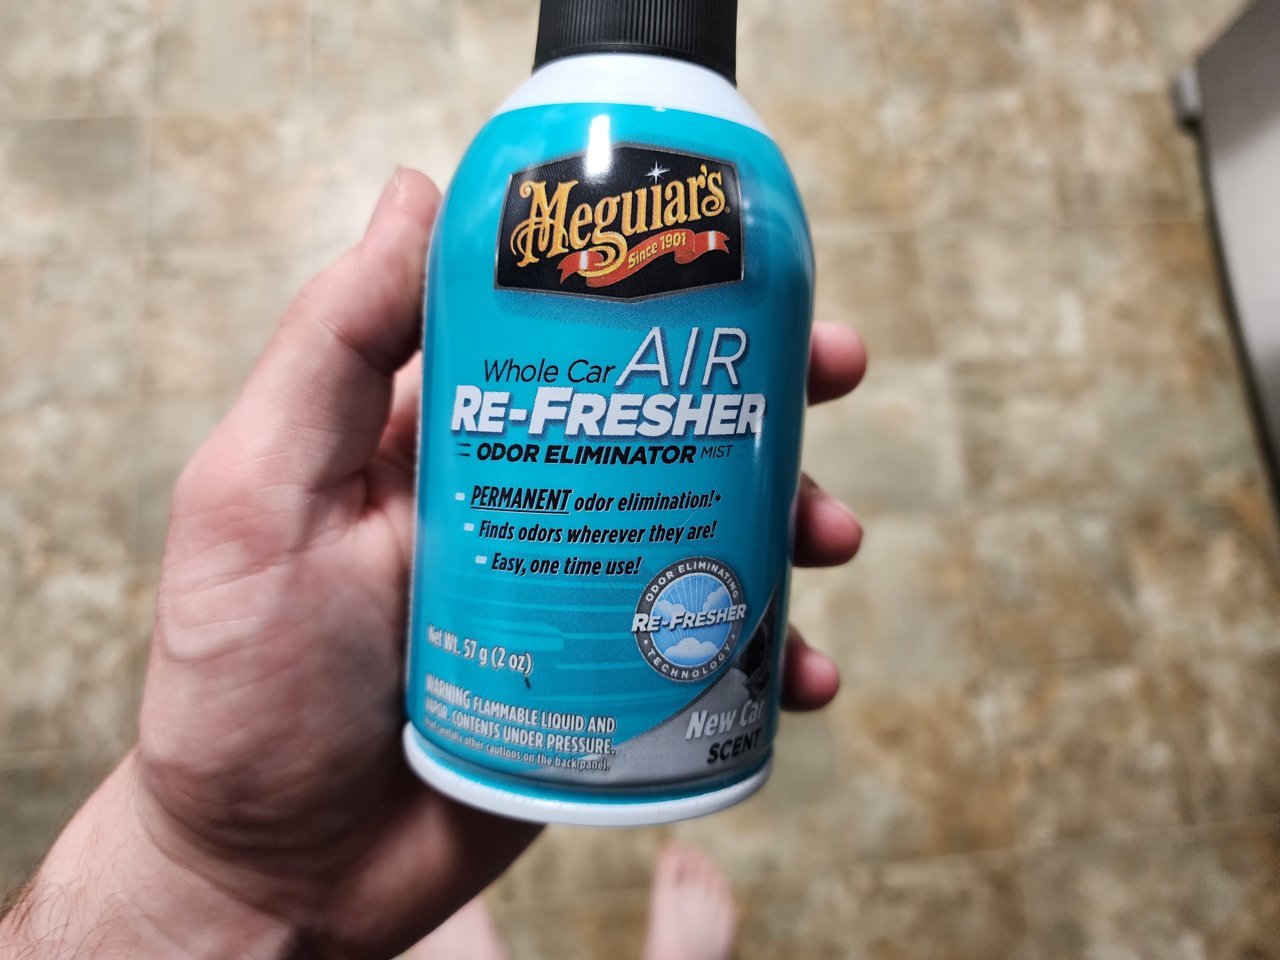 Car smells bad? Definitely try this Meguiars air refresh scent bomb in, Car Air Freshener